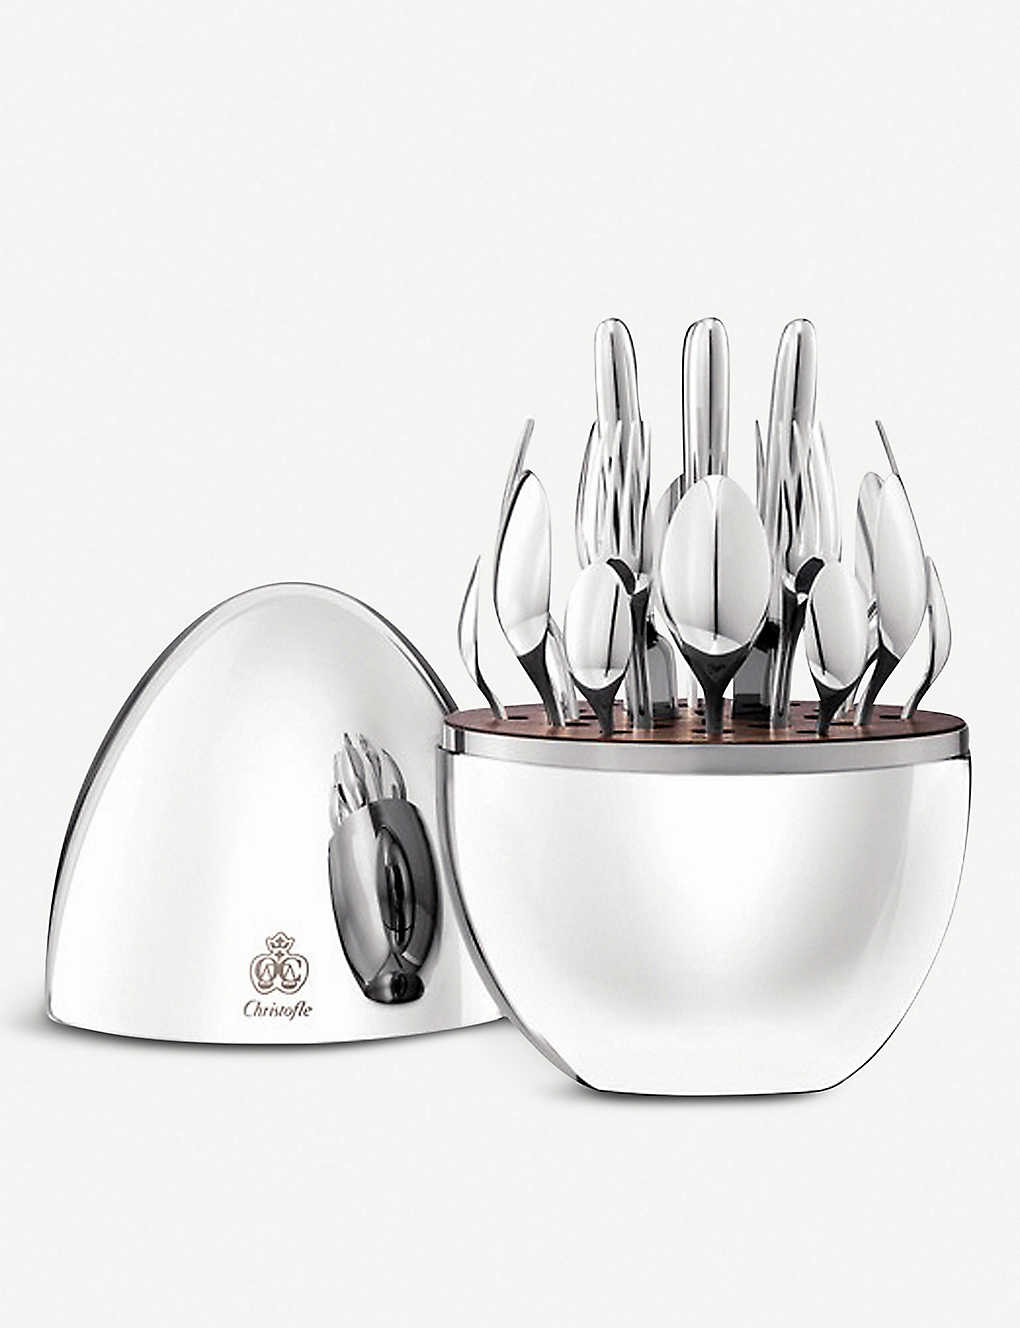 Christofle Mood Silver-plated Stainless Steel Cutlery Set Of 24